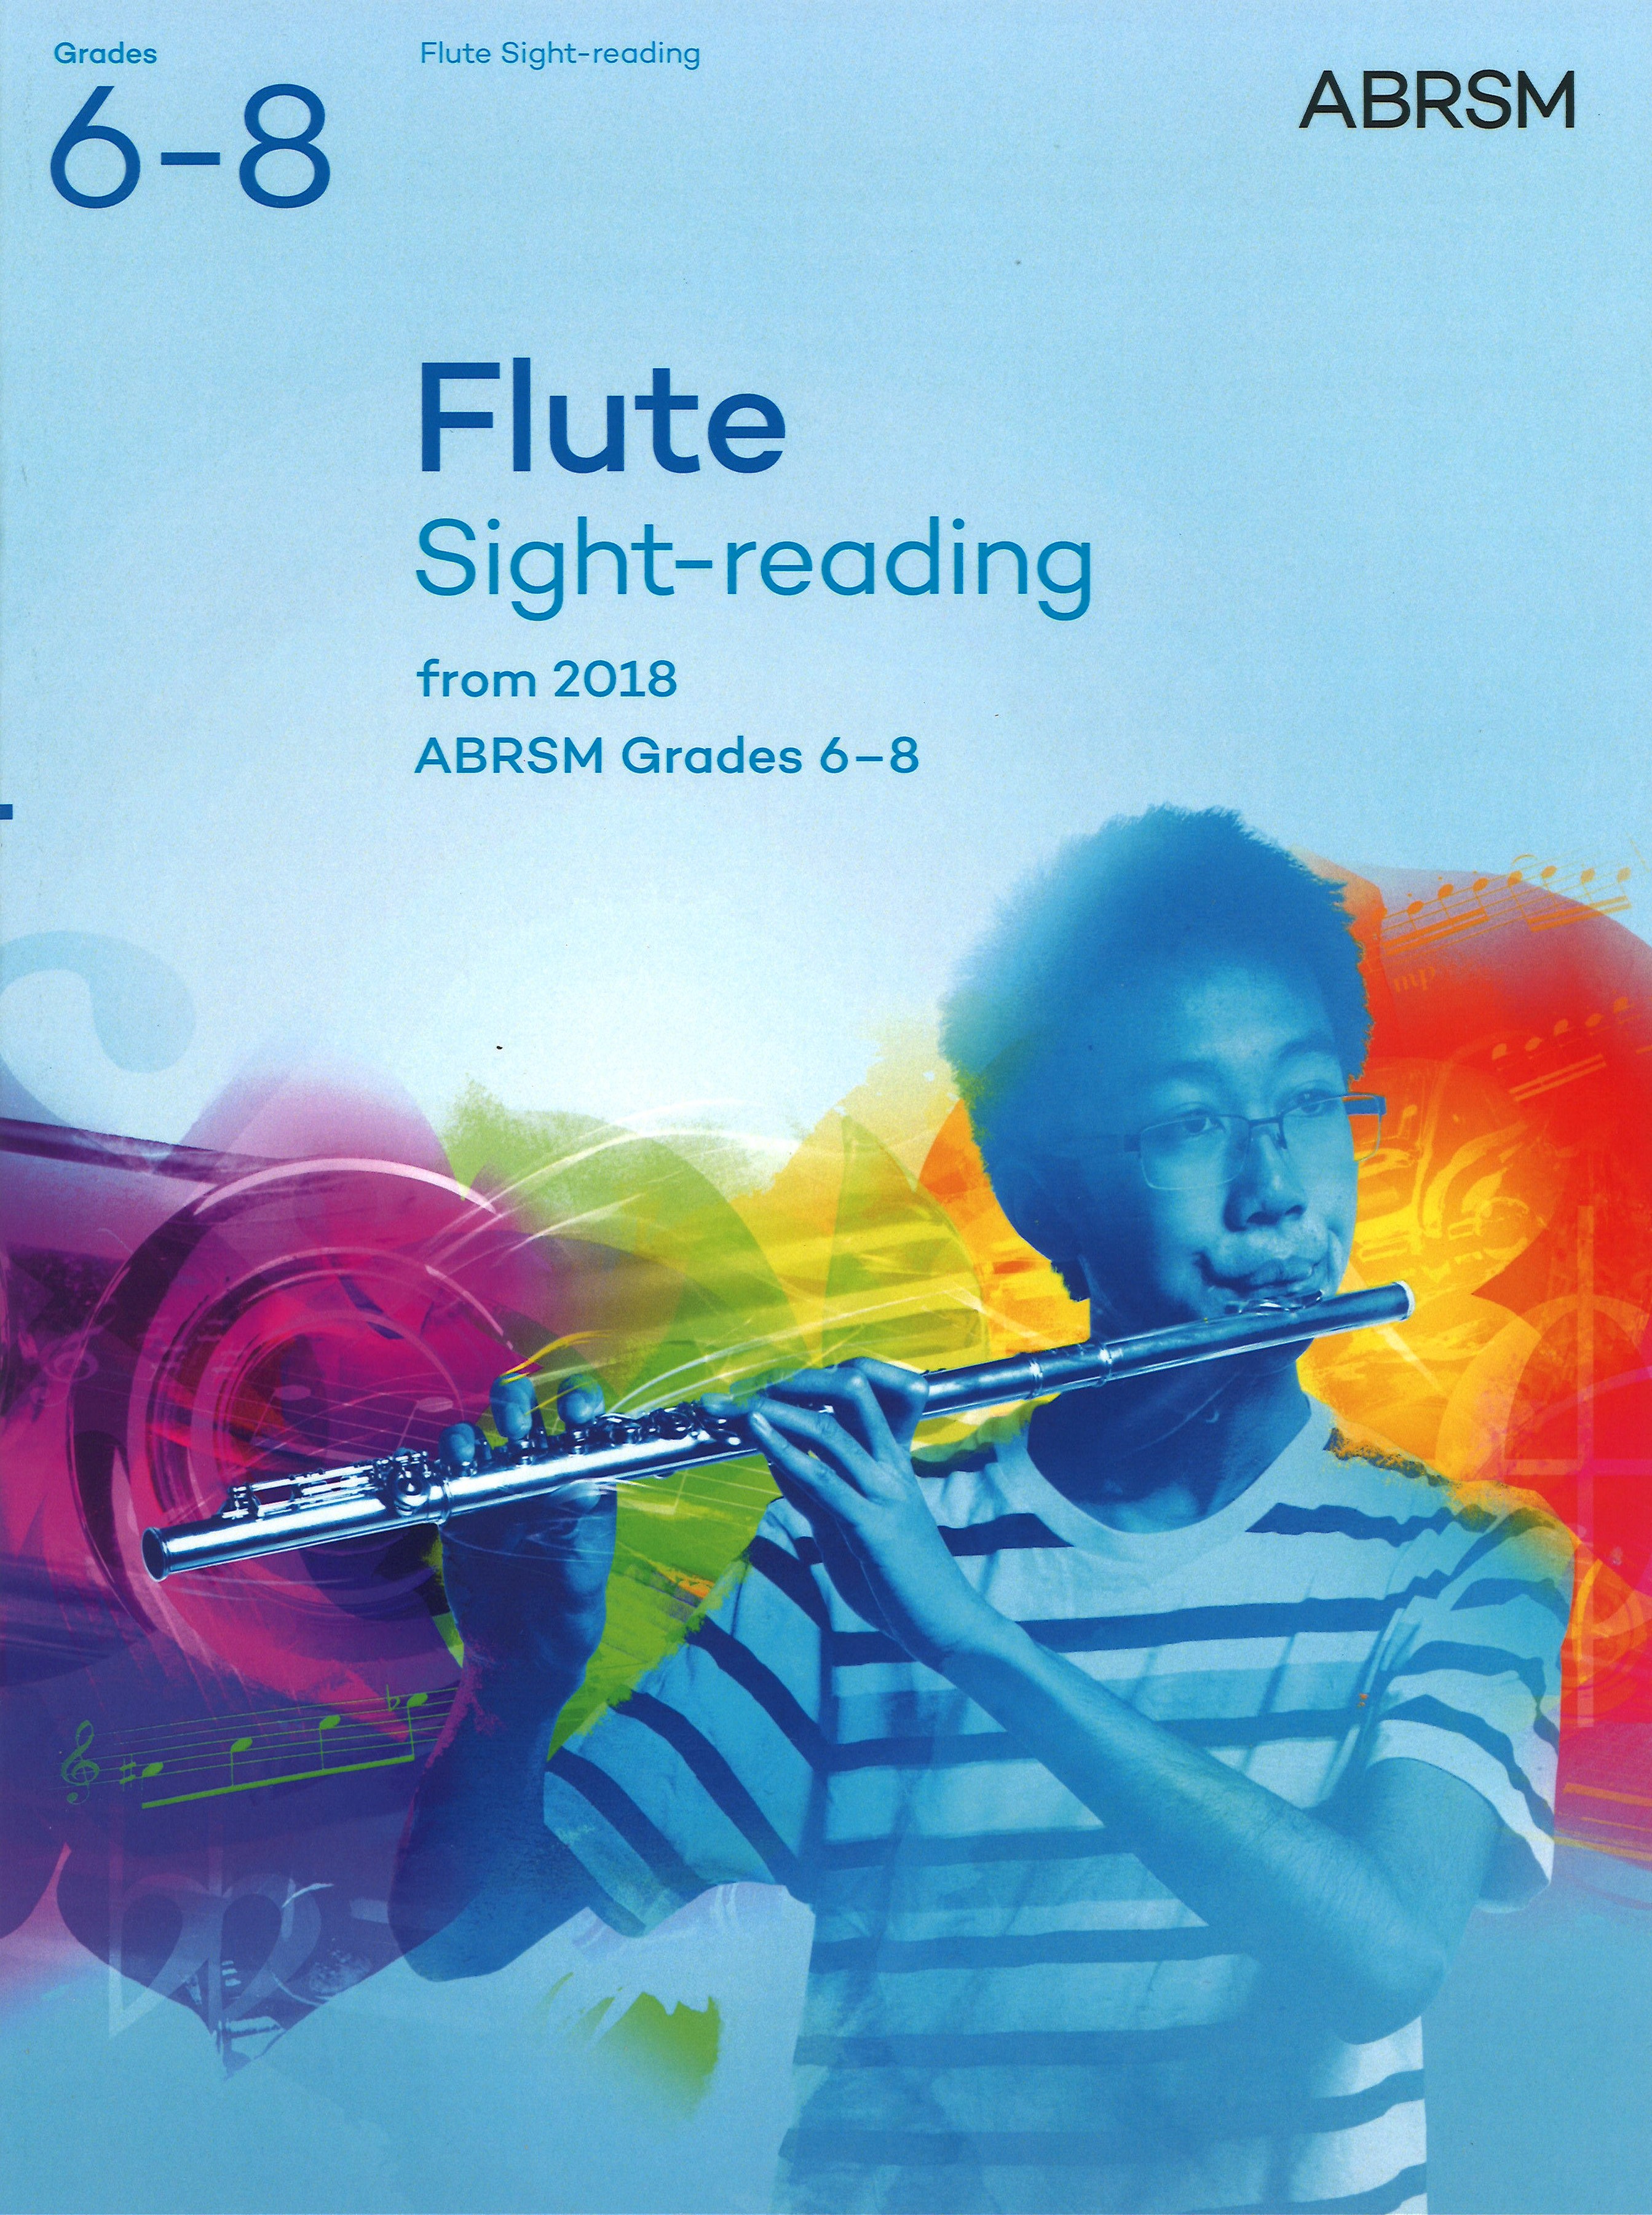 Flute Sight Reading Tests 2018 Grades 6-8 Abrsm Sheet Music Songbook